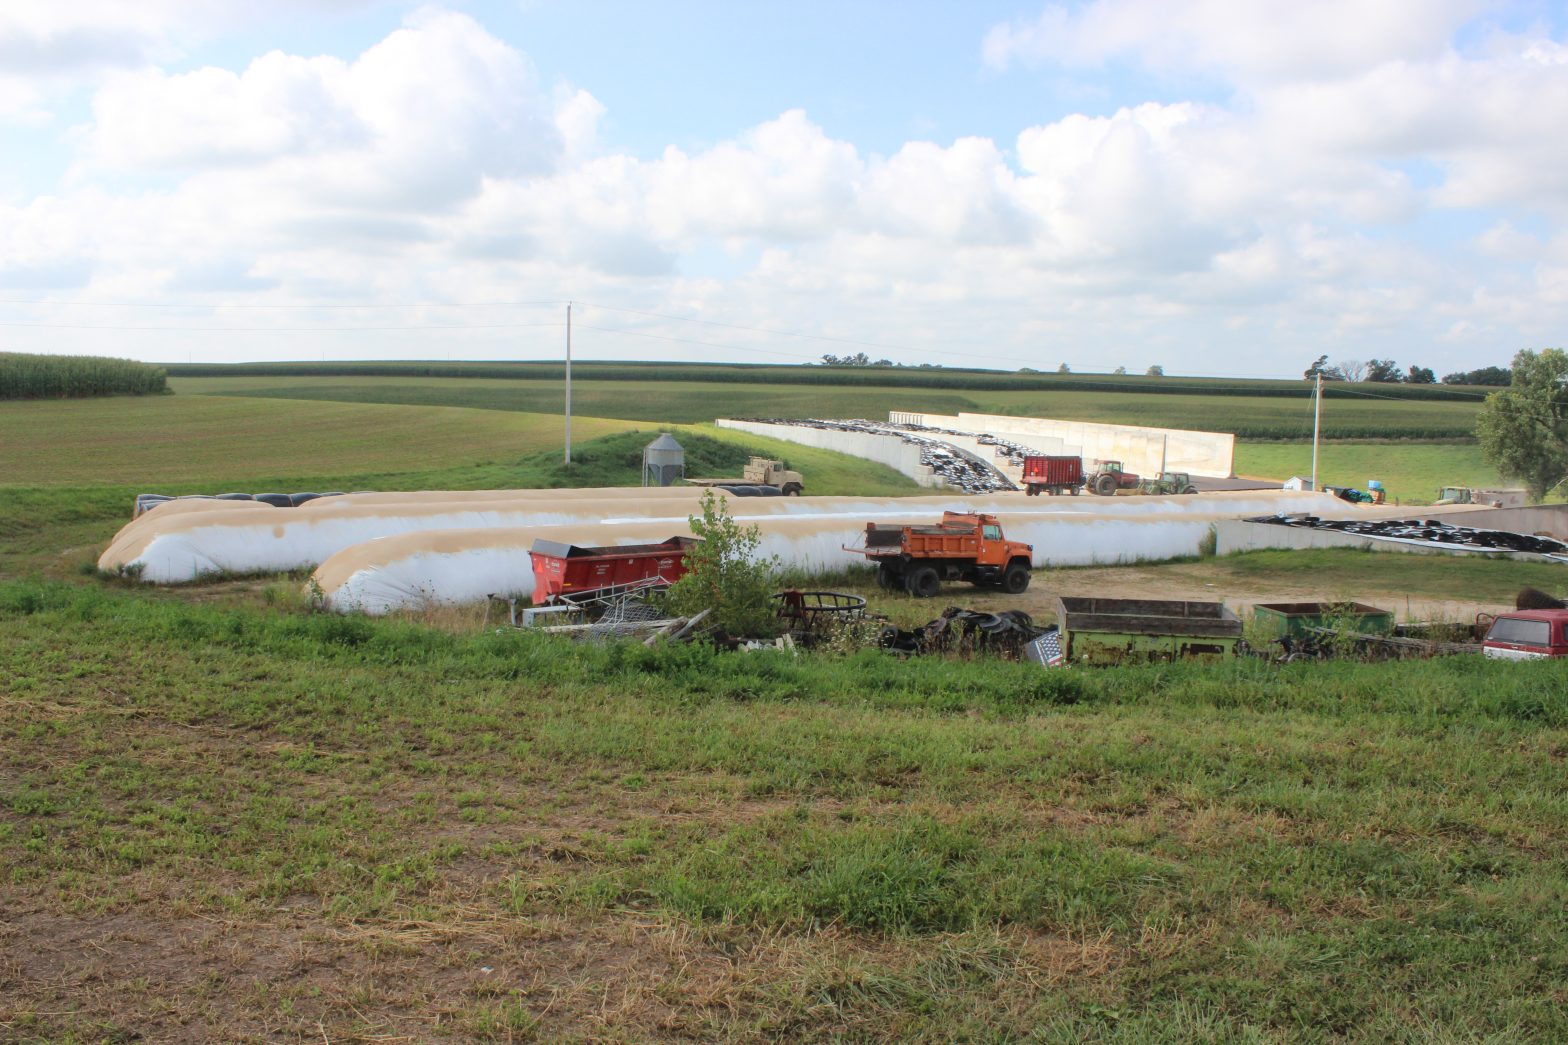 Jerry Volenec, Hardscrabble Farms, LLC in Montfort, Wisconsin, experienced hail damage to more than 2,100 feet of silage bags.